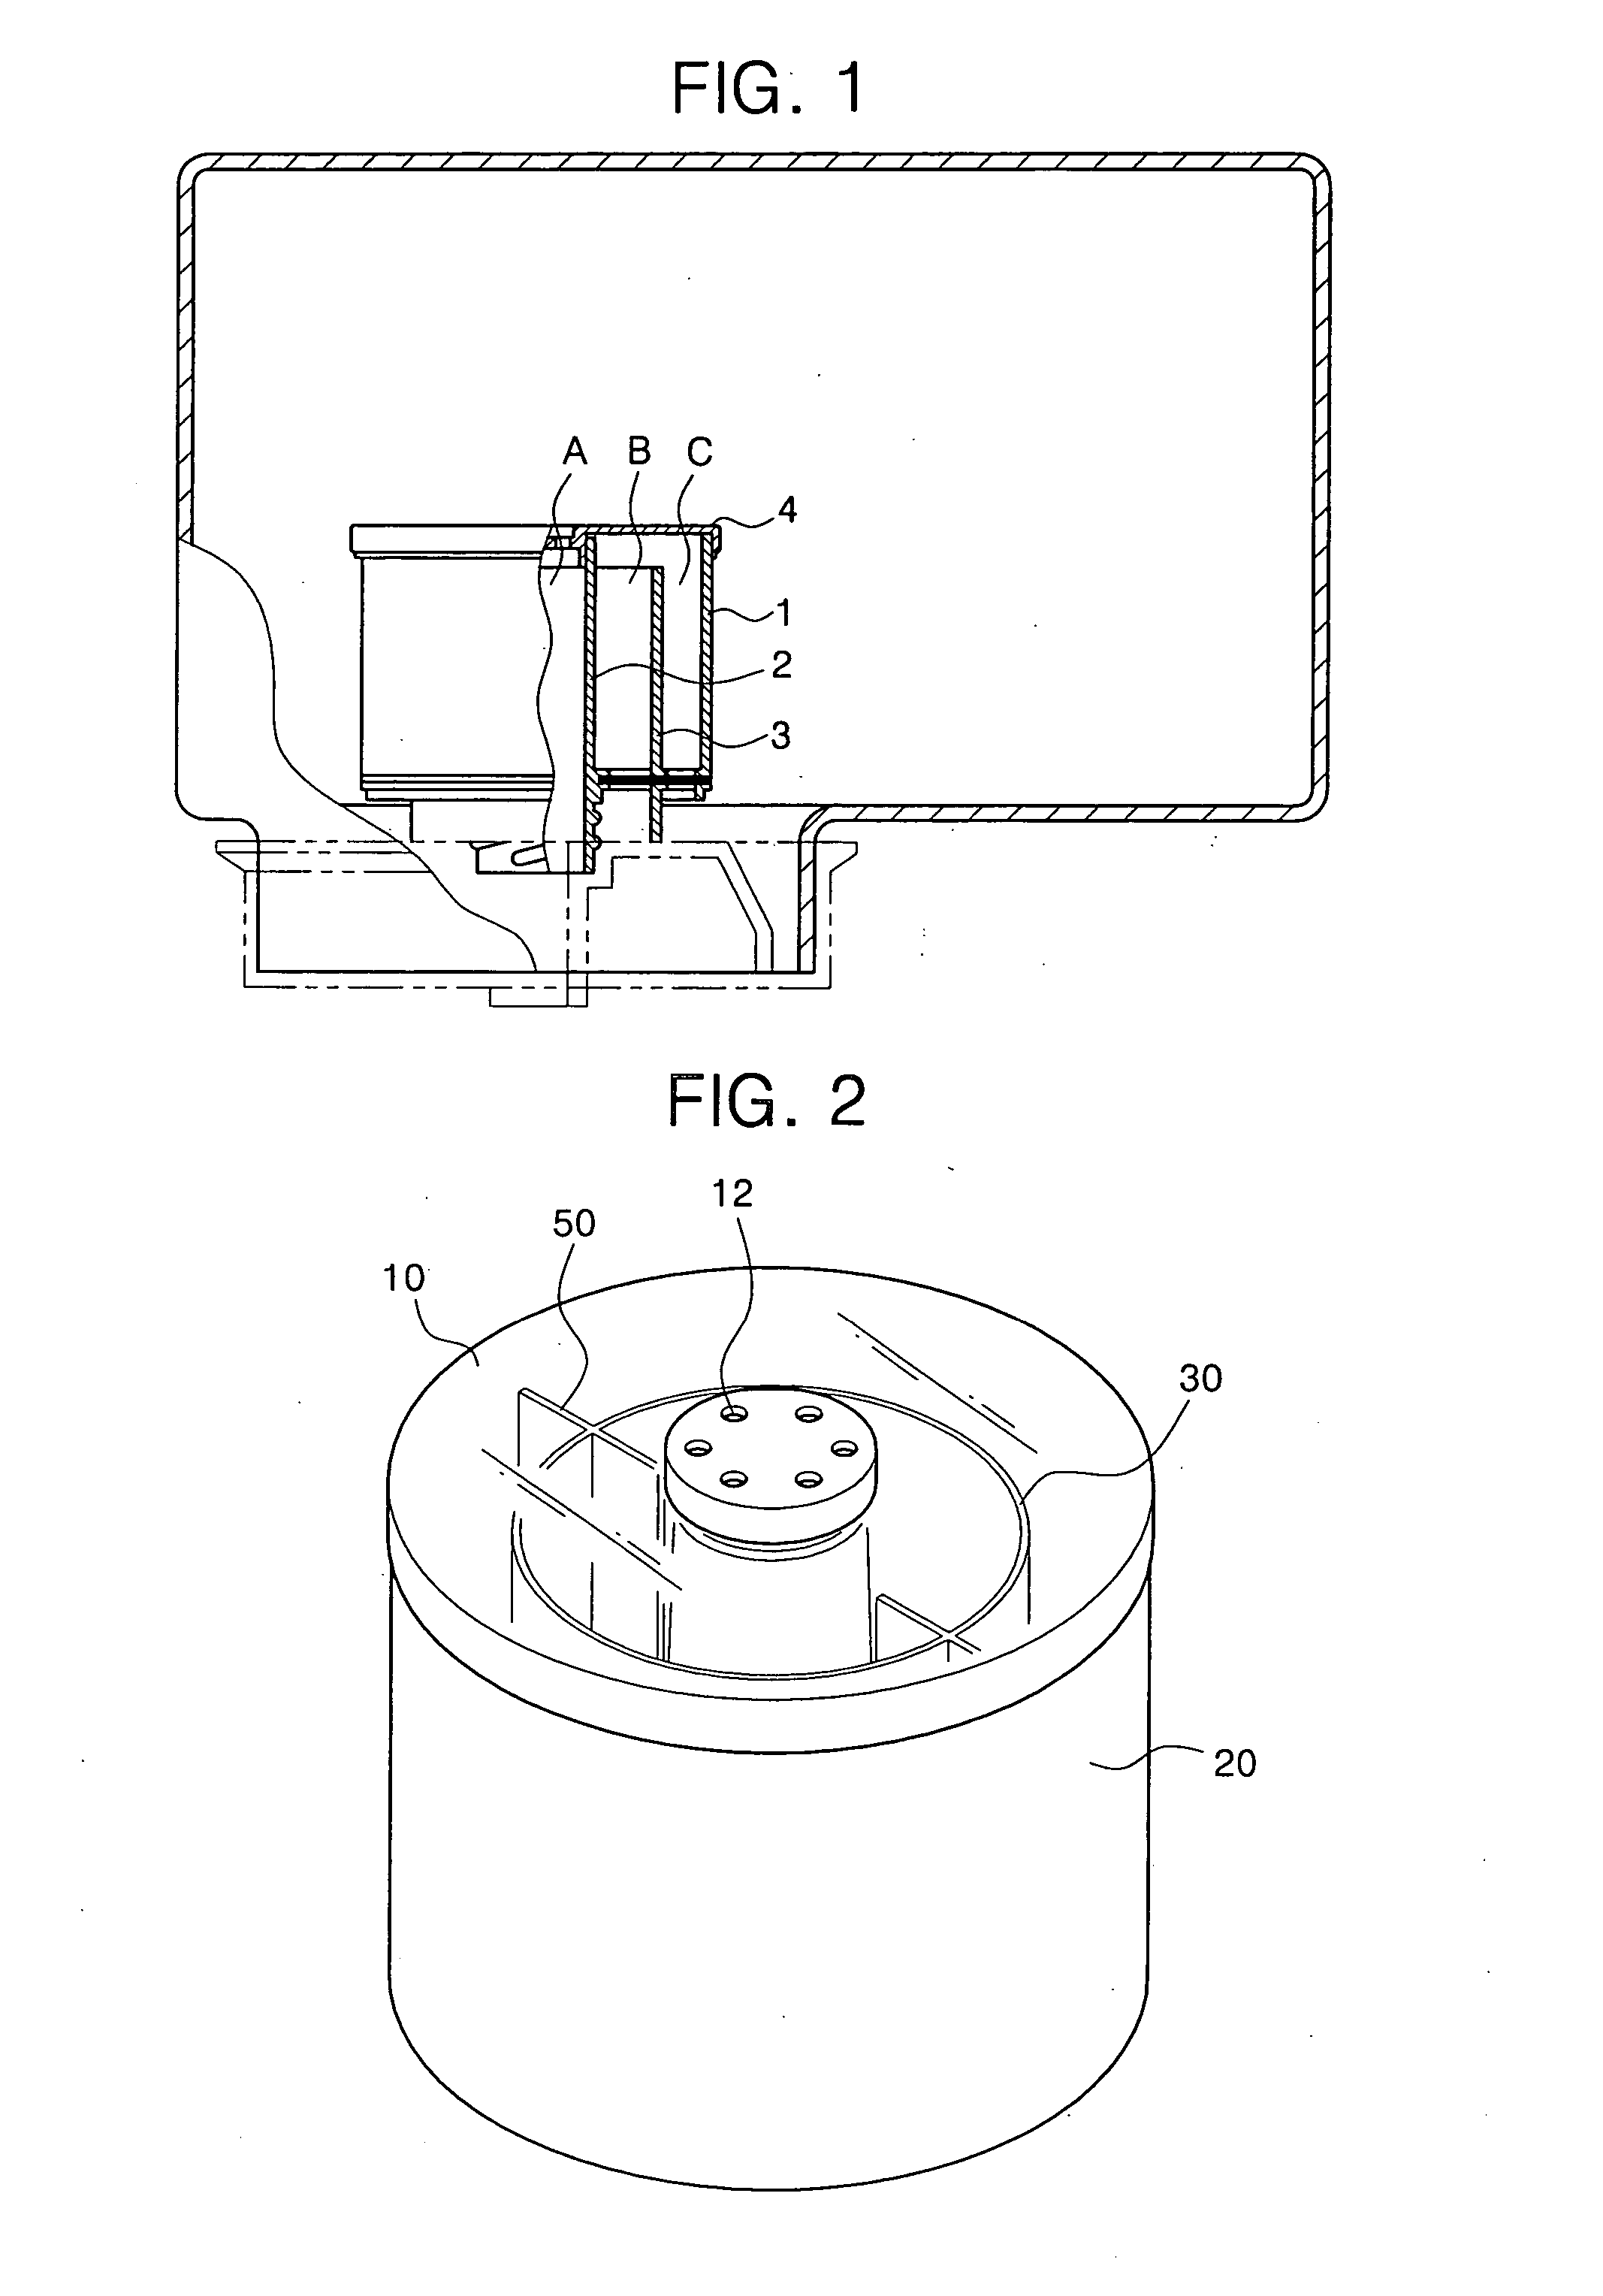 Water filtering device